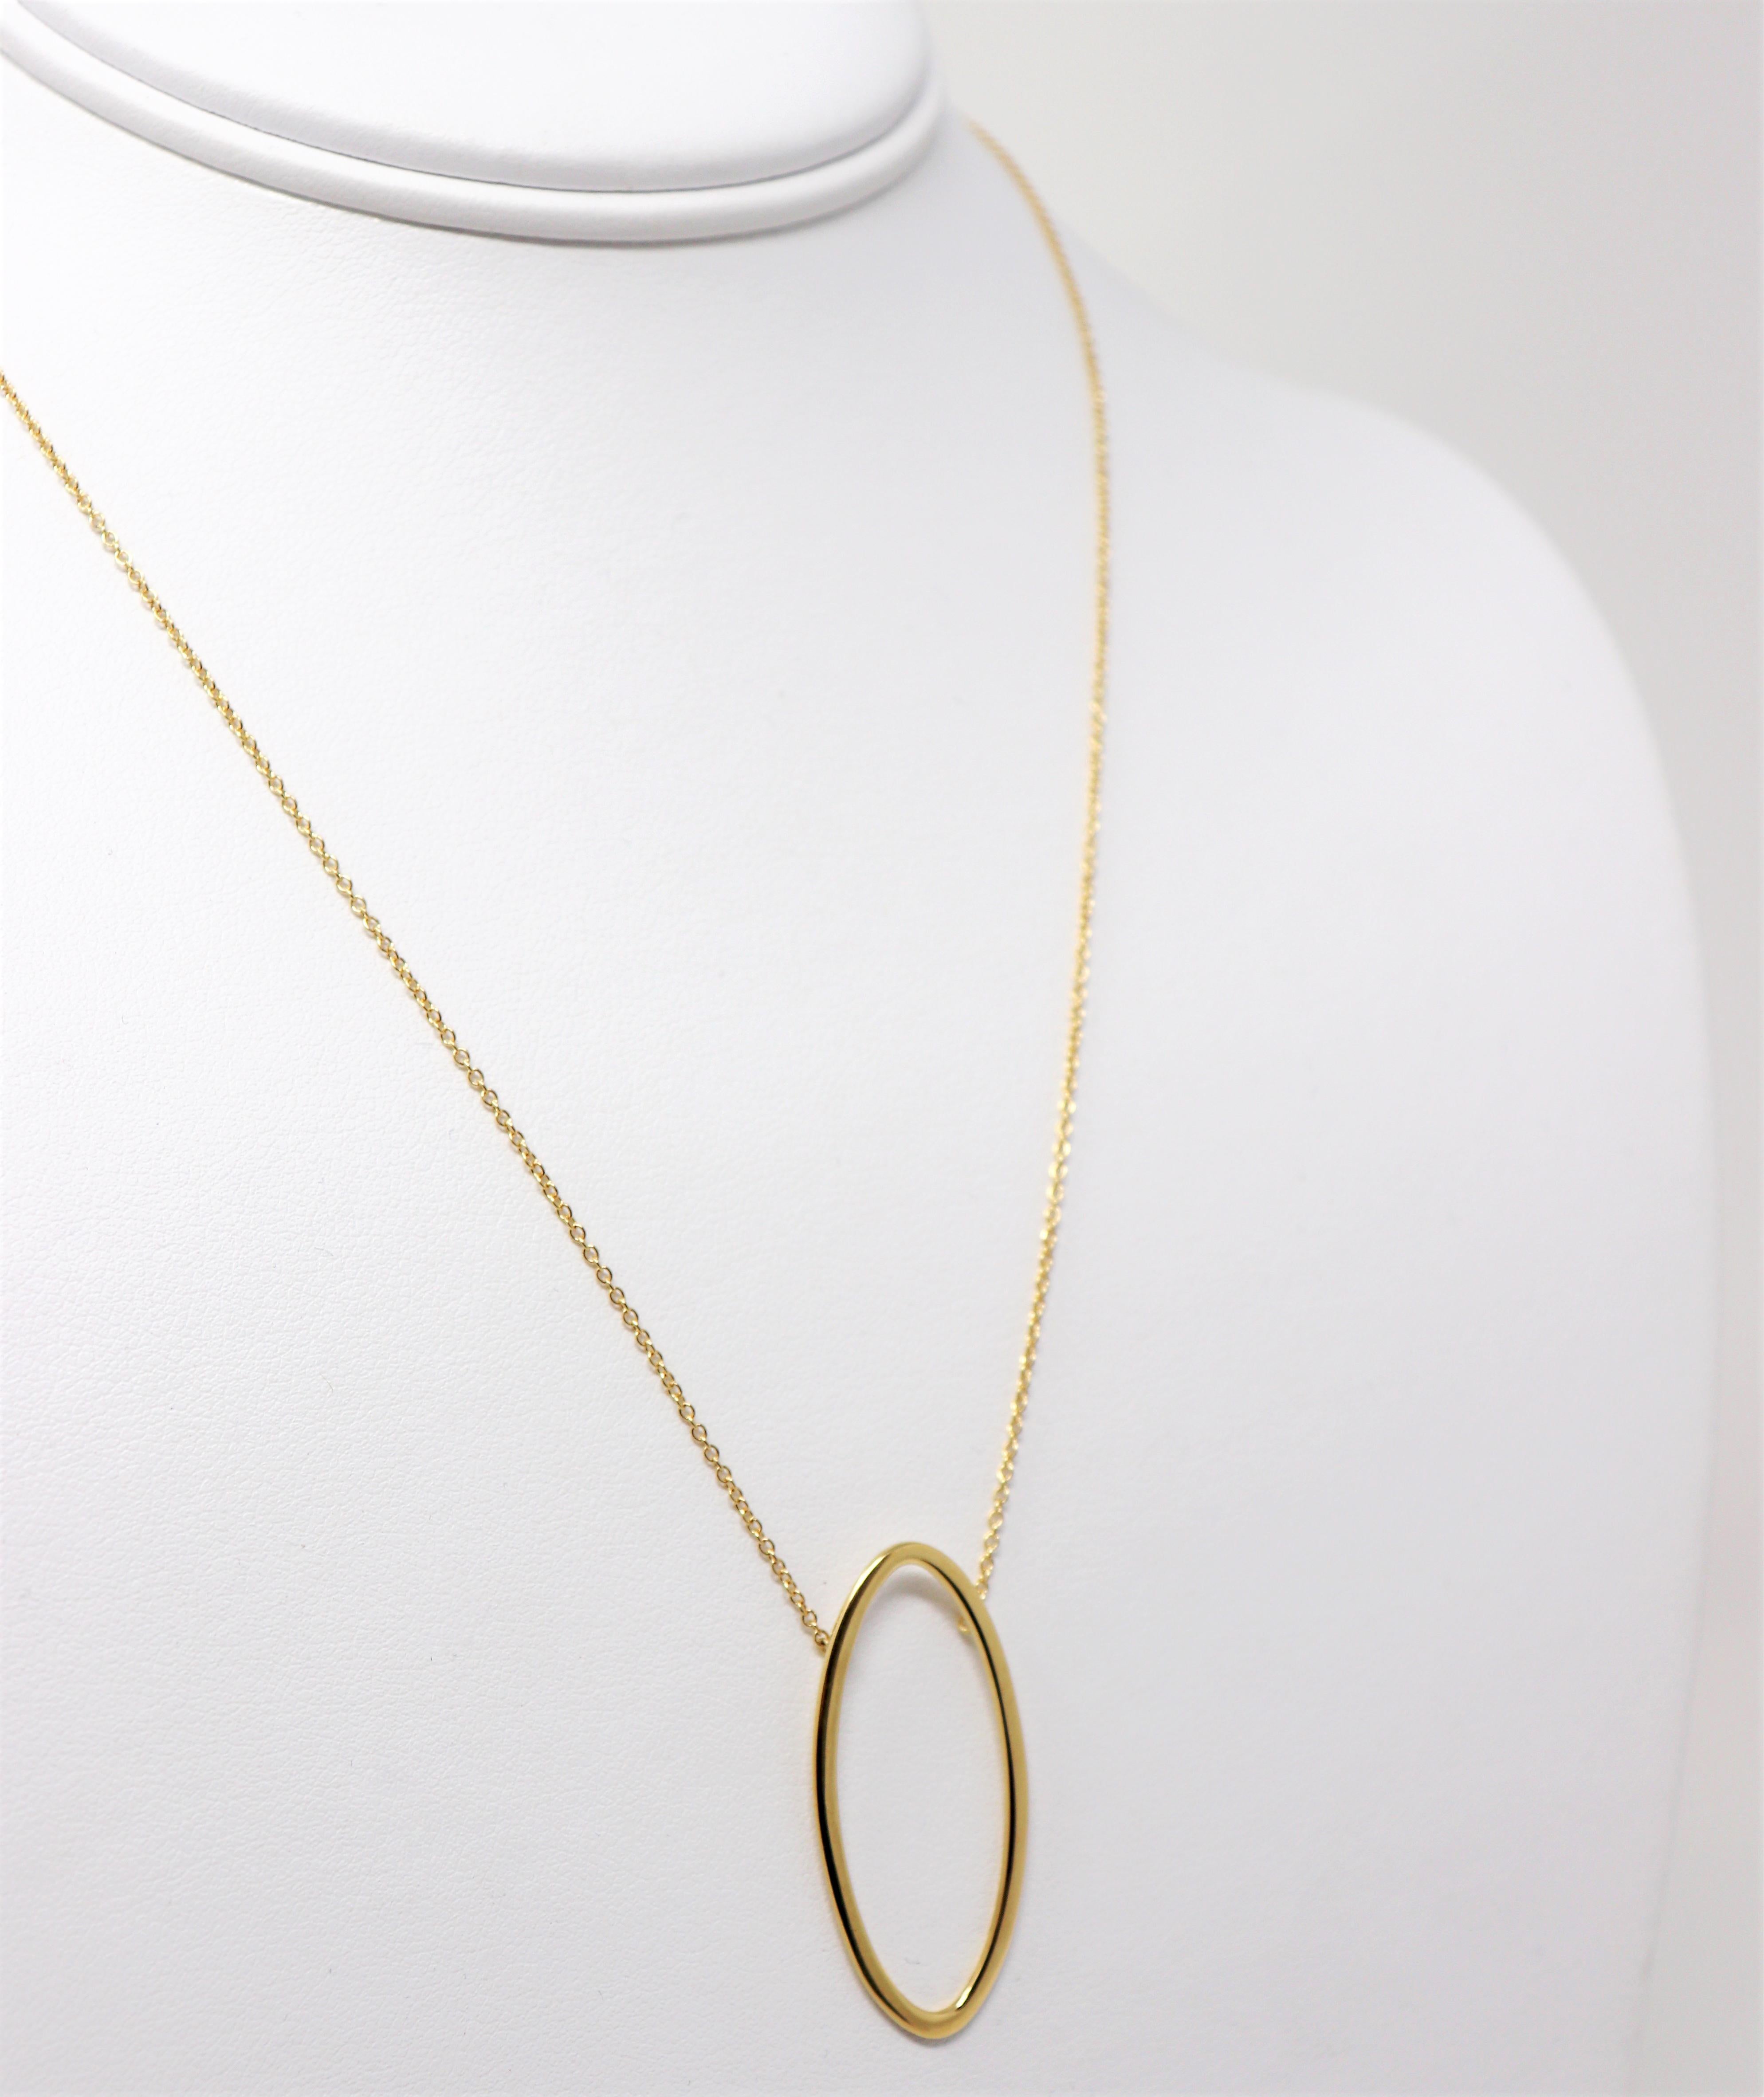 Lovely golden pendant necklace by Tiffany & Co. is the epitome of modern elegance. The timeless design combined with the warm yellow gold setting makes for a piece that you will wear time and time again.  

This beautiful designer necklace features